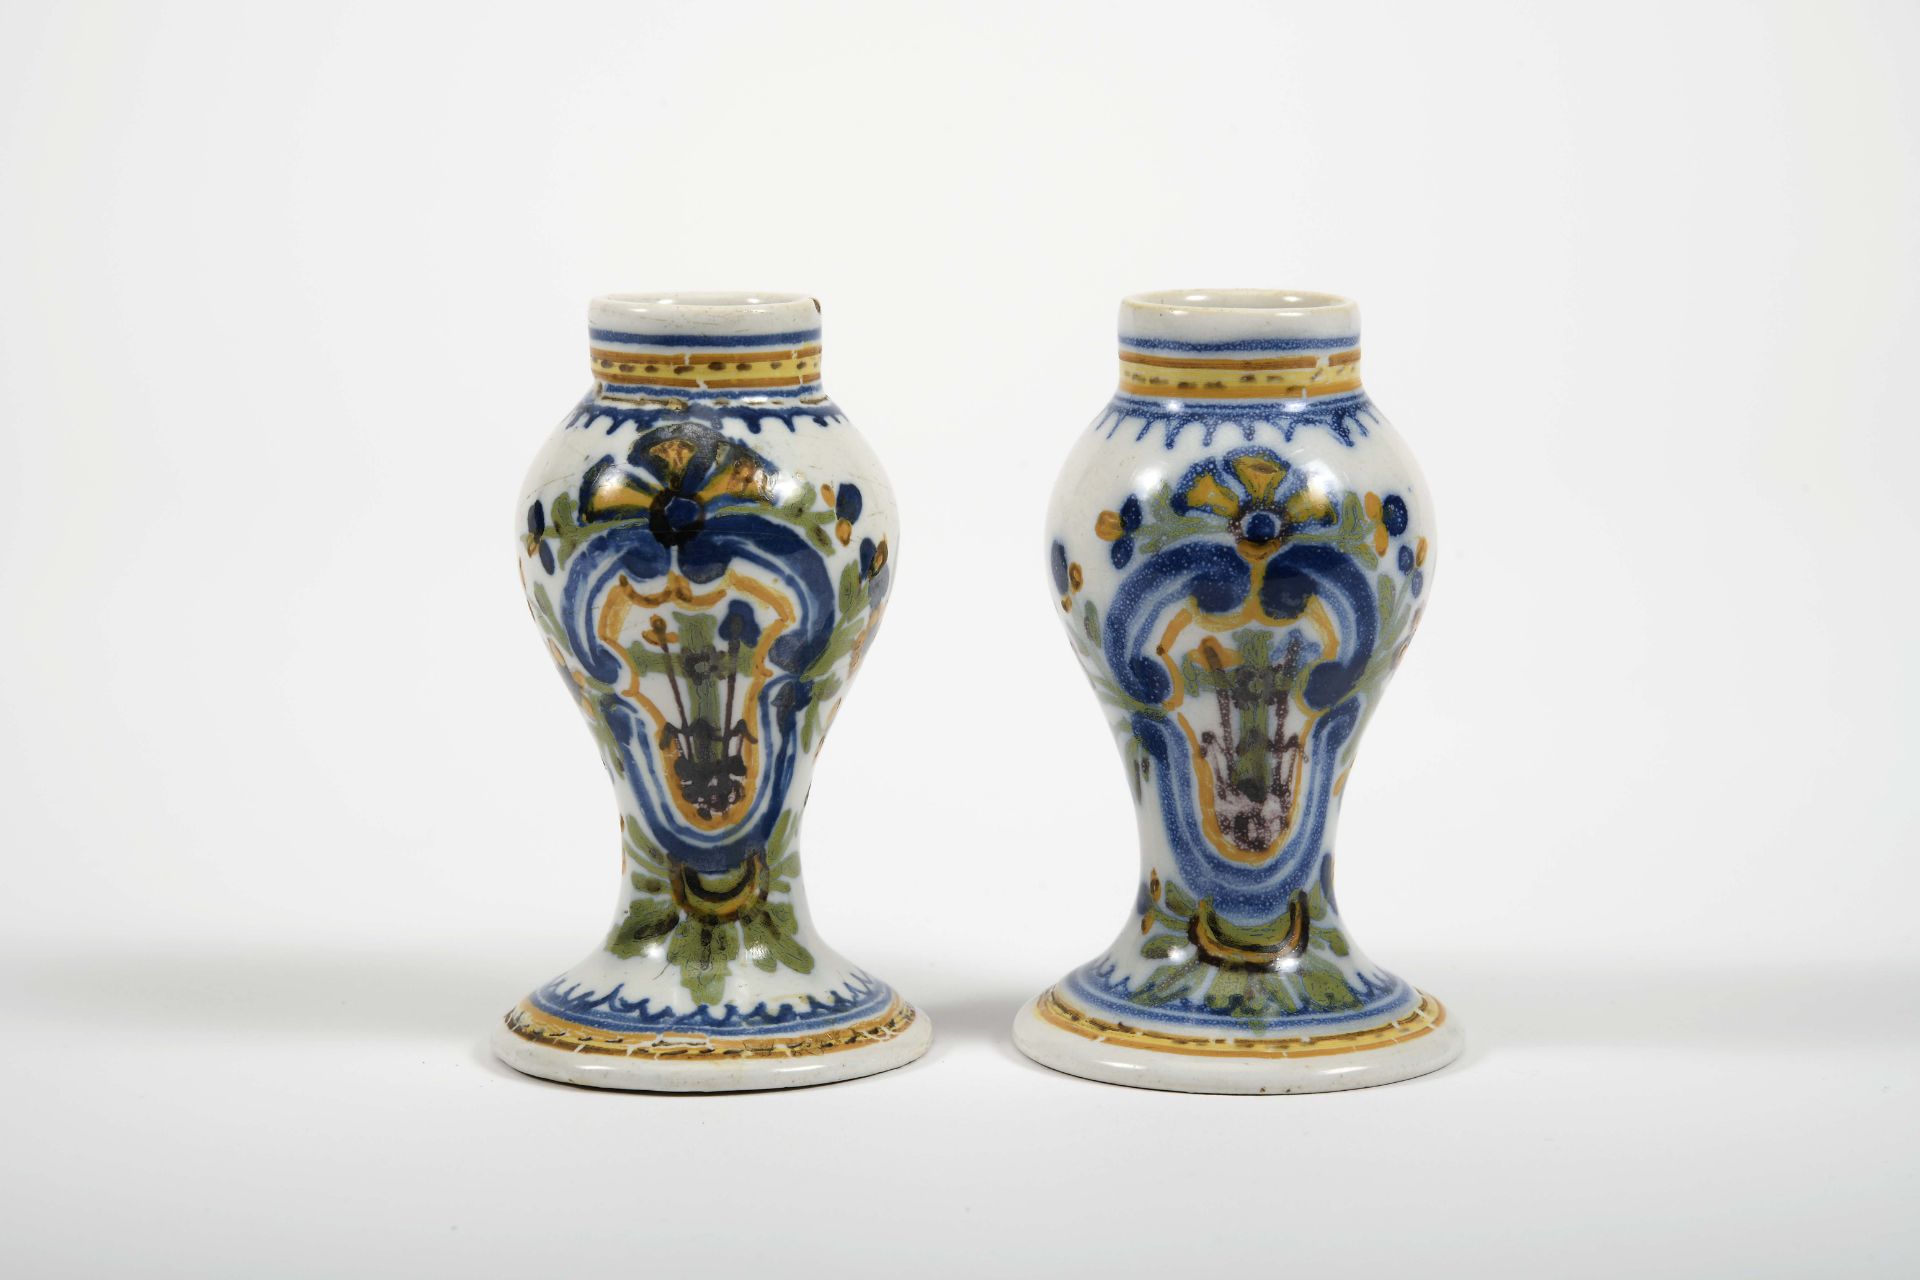 A pair of small potted vases